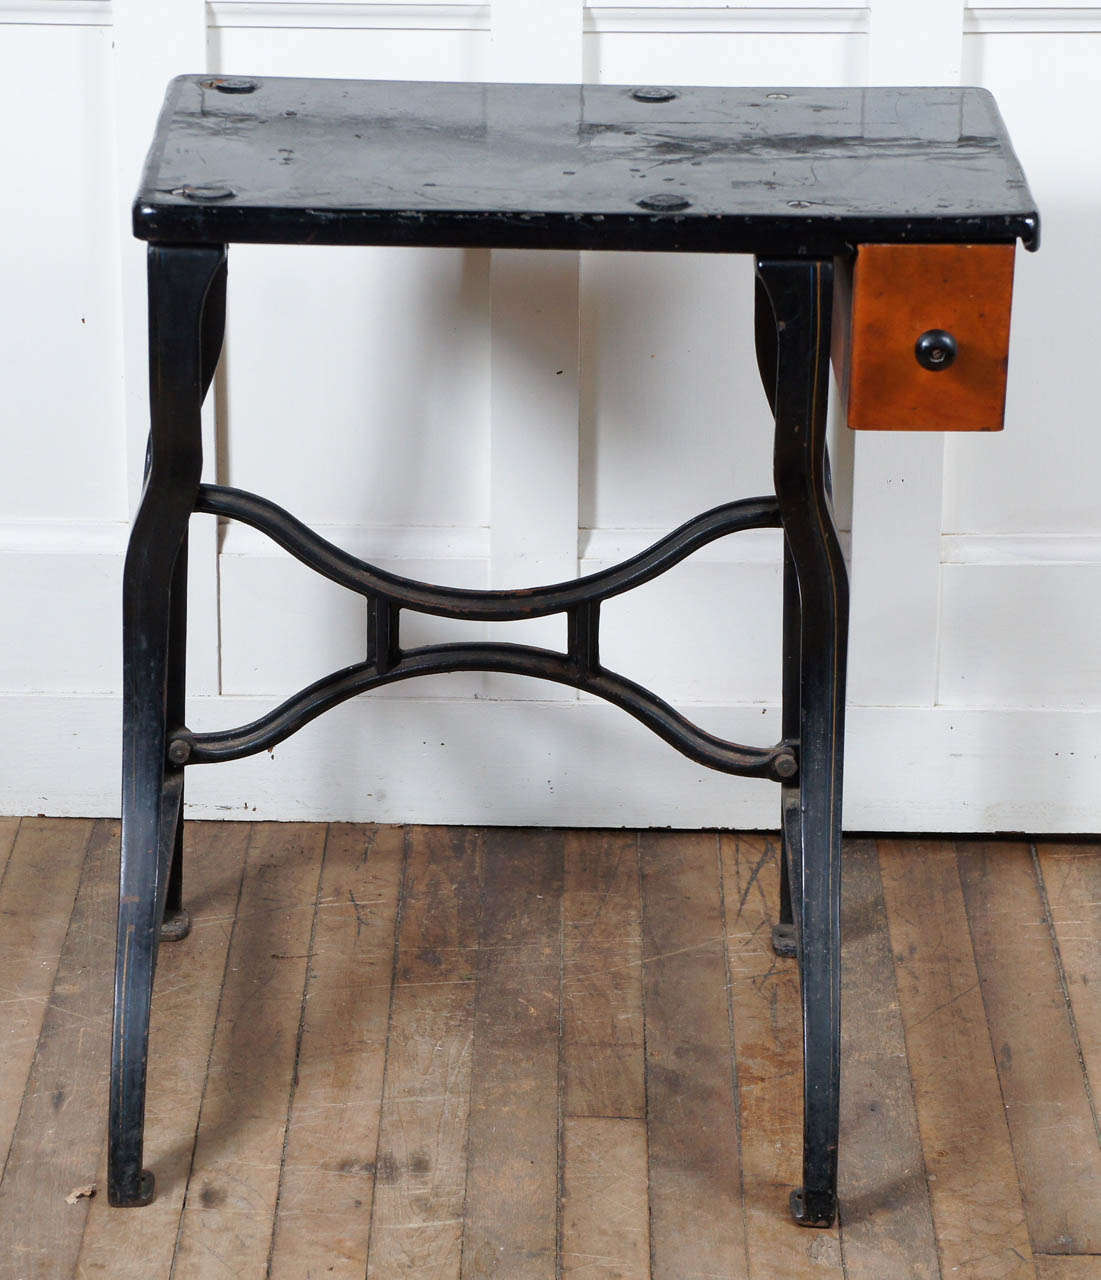 cast iron stand - black enamel with pin striping - one drawer in wood suspended from top